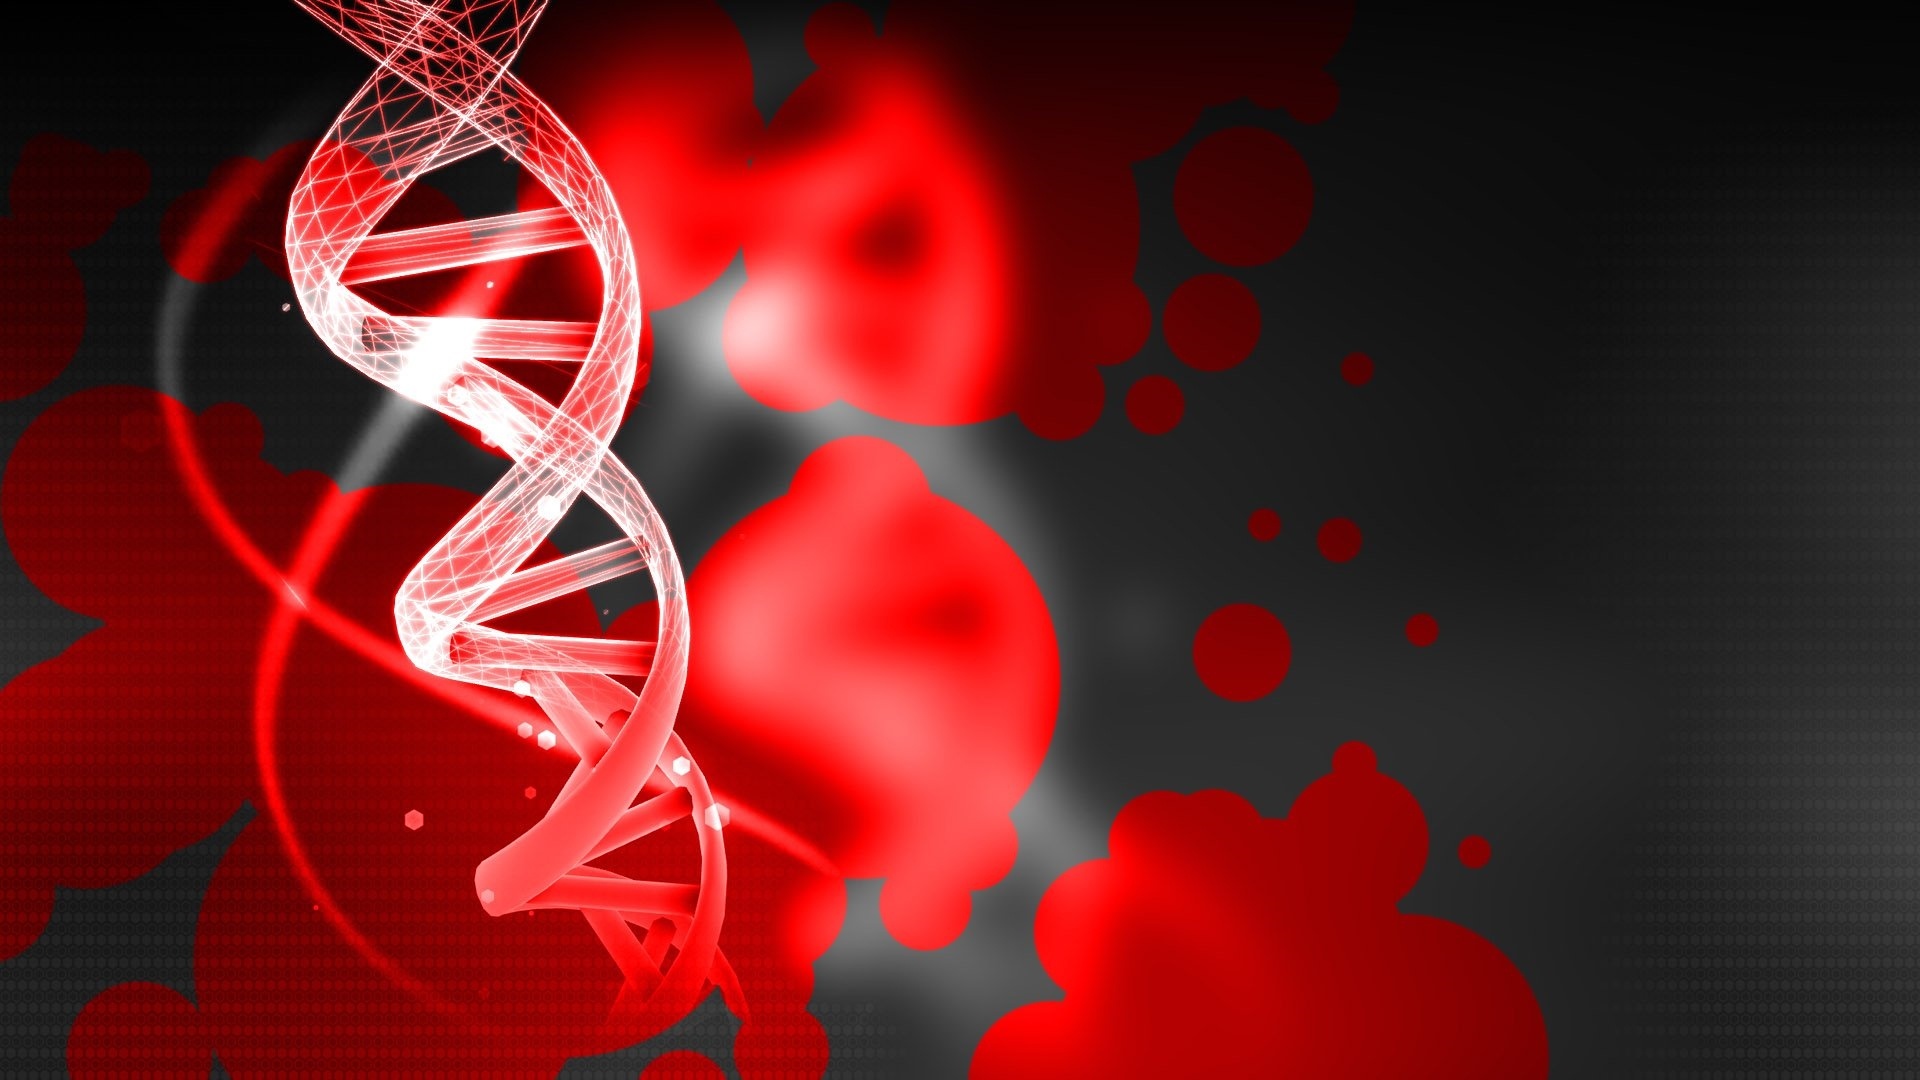 Dna wallpaper for computer